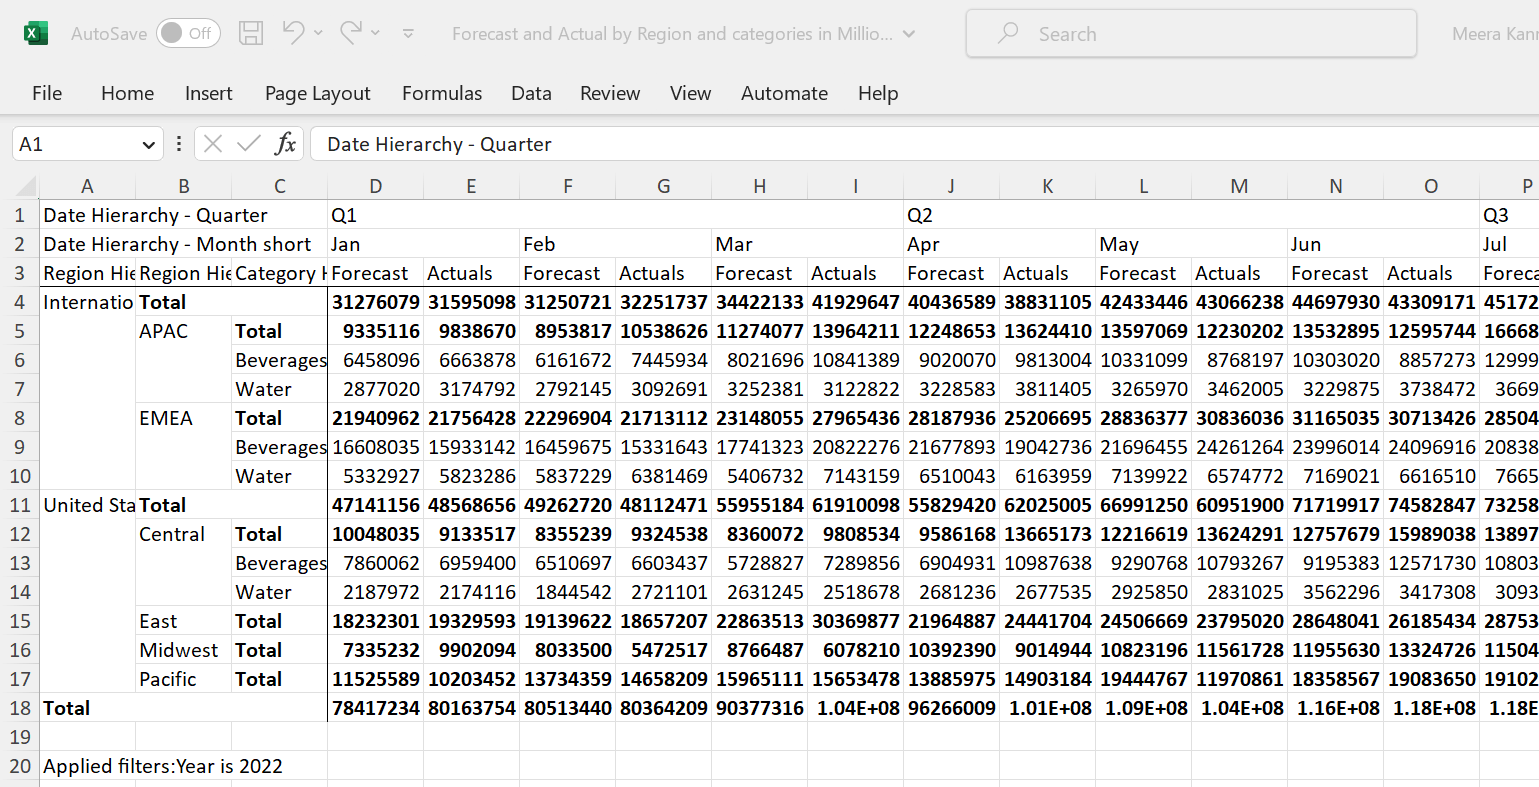 matrix exported to excel file